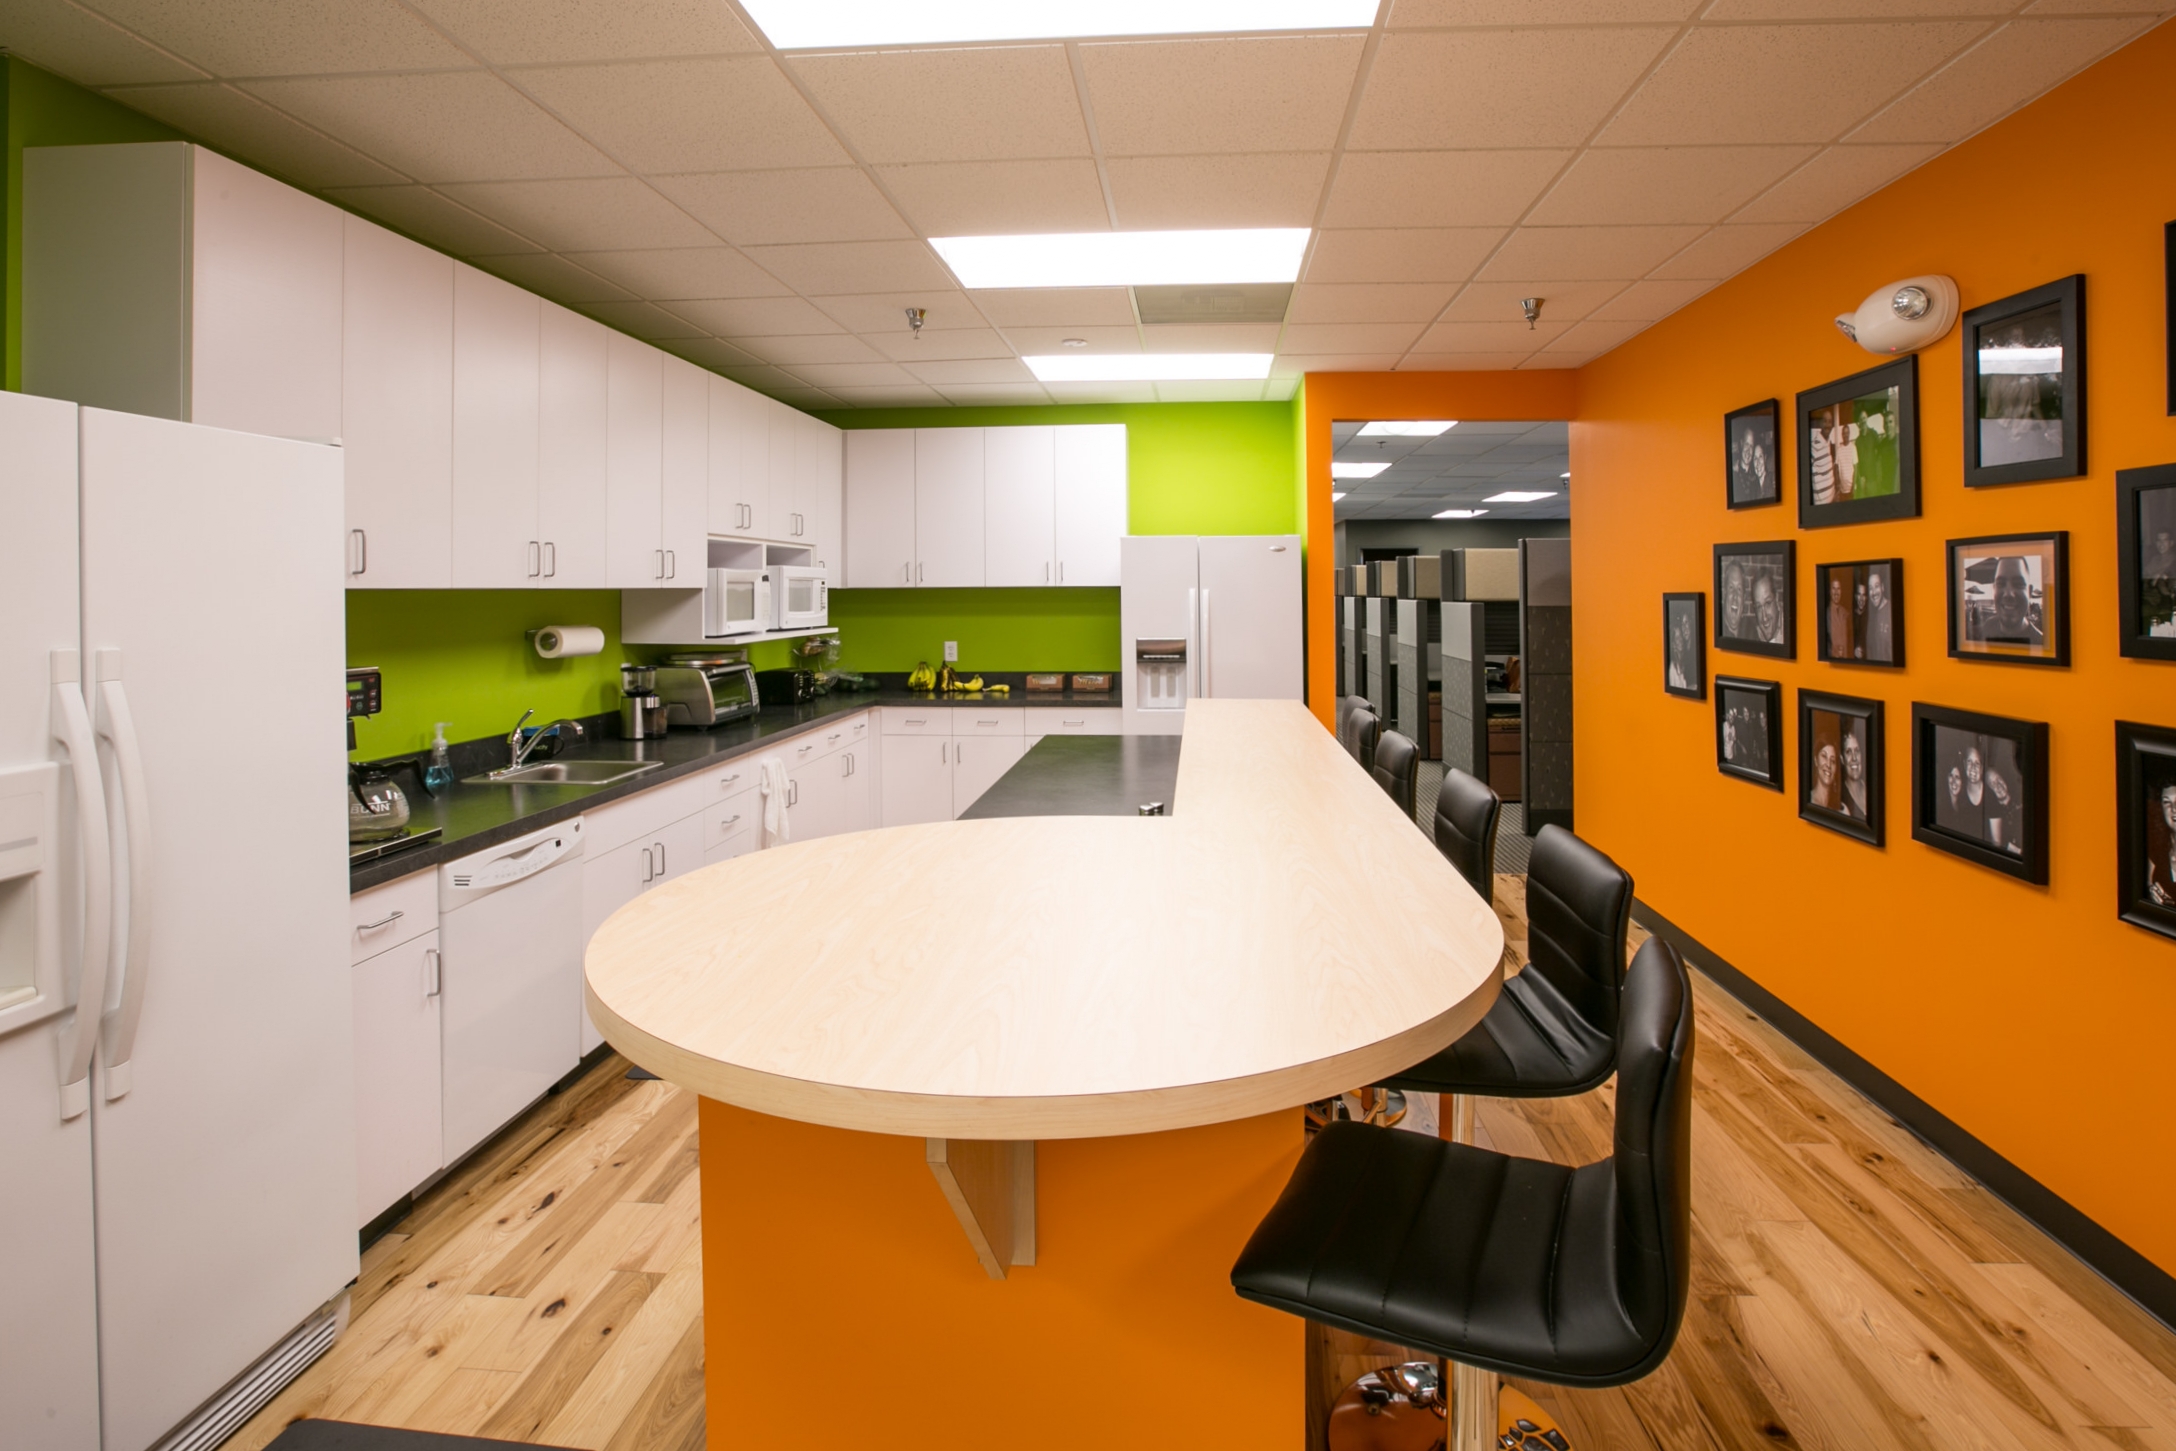 Lucity's new break room in their remodeled office space